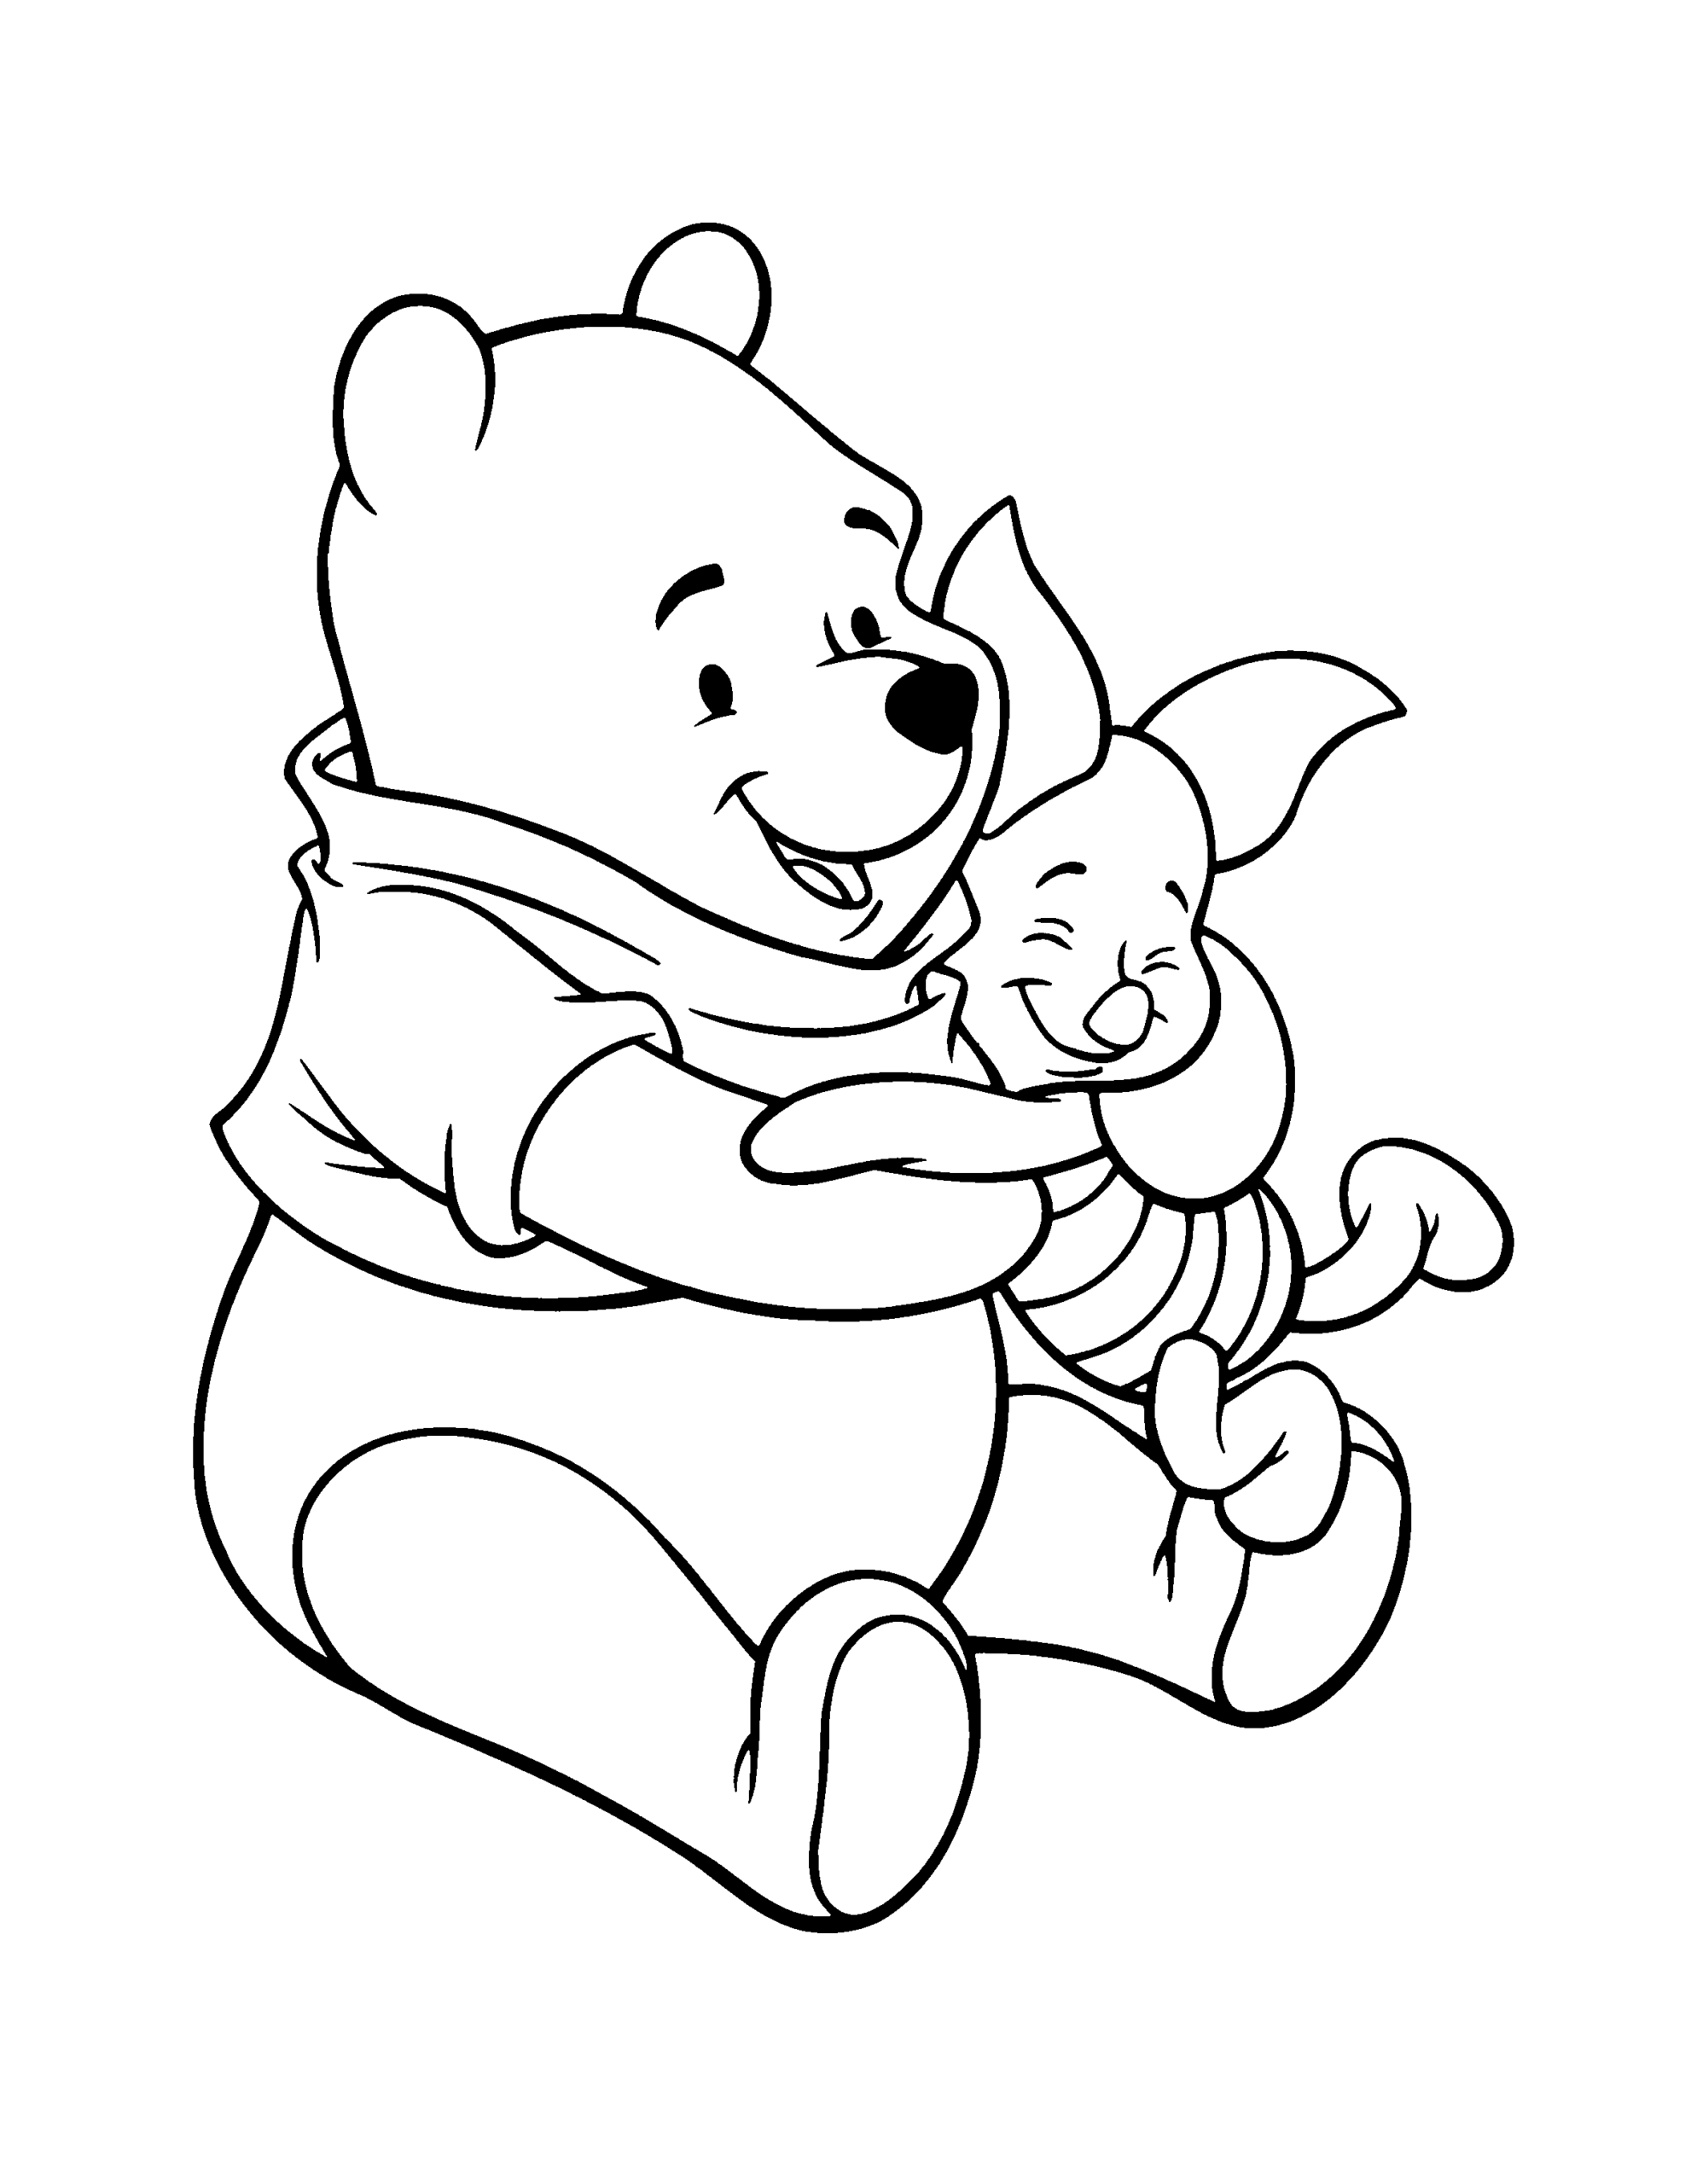 Winnie the Pooh Coloring Pages Cartoons winnie the pooh 75 Printable 2020 7194 Coloring4free